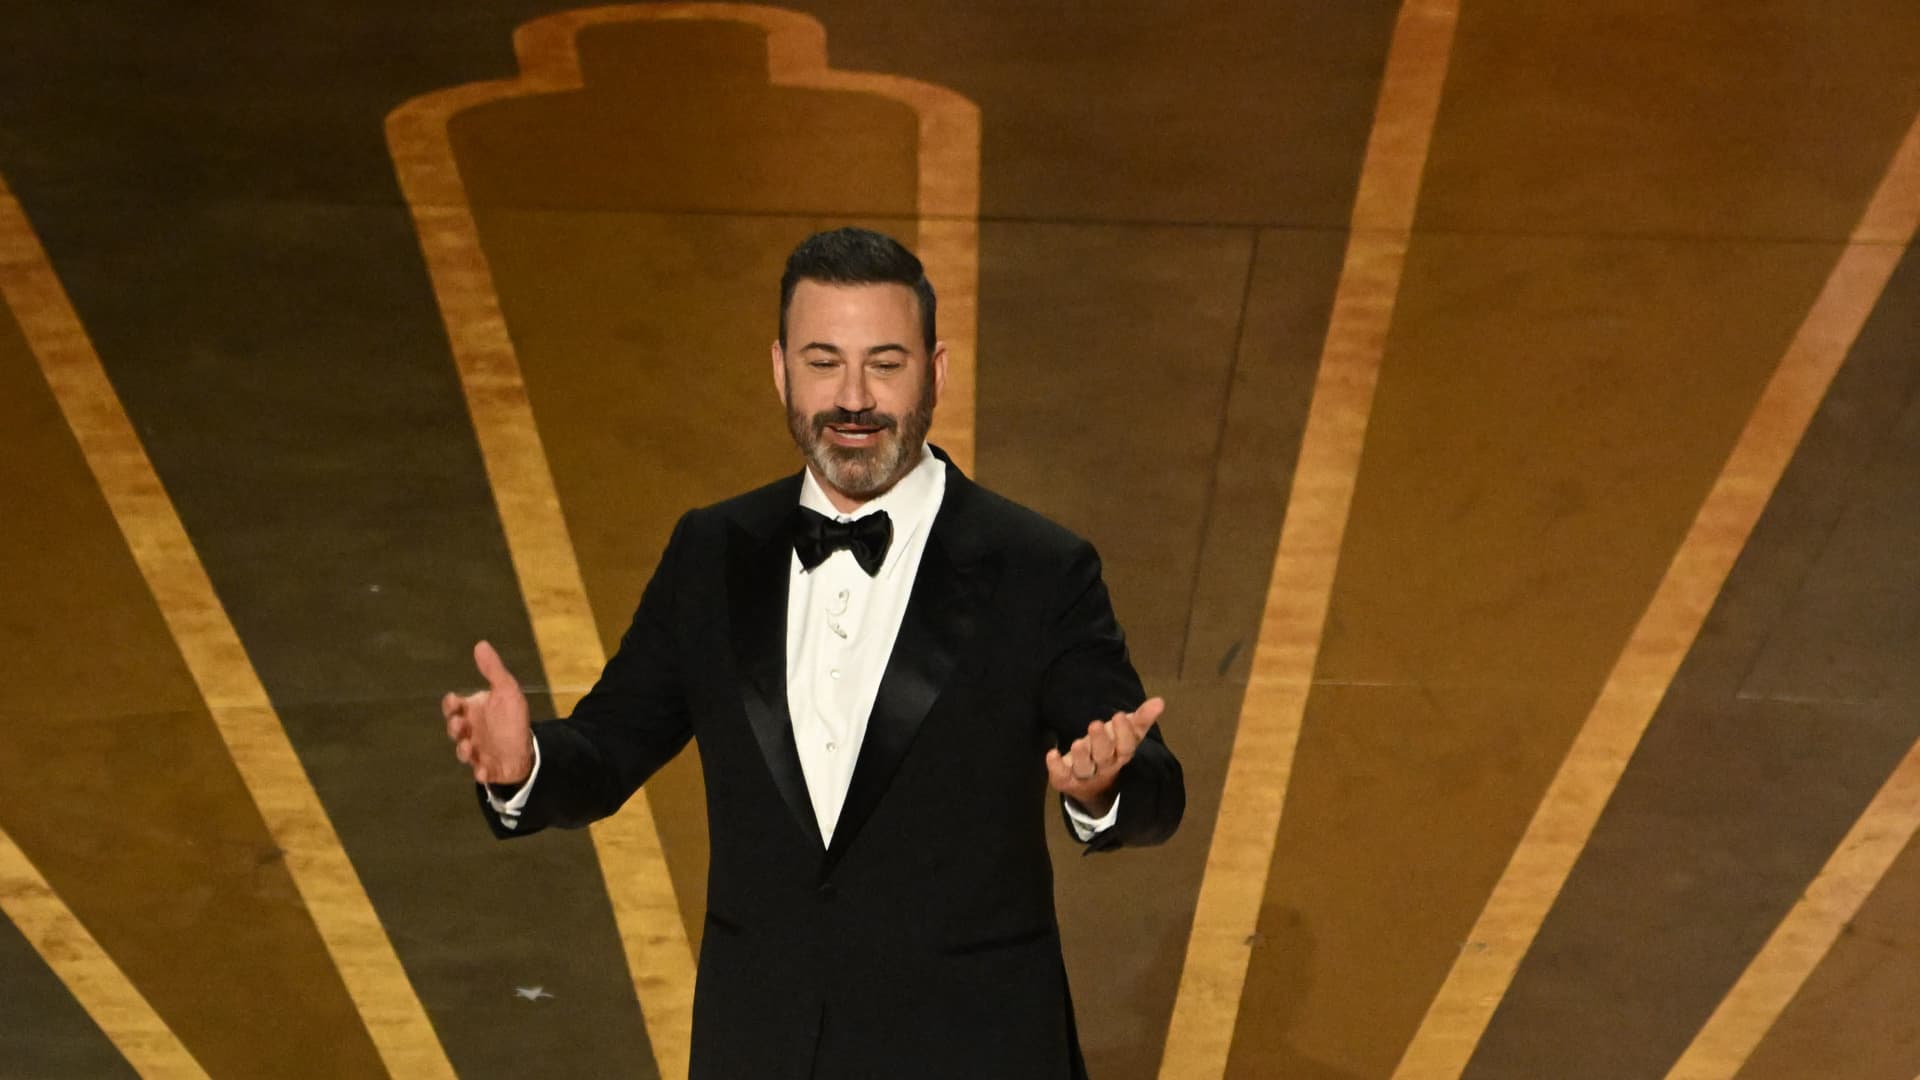 TV host Jimmy Kimmel speaks onstage during the 95th Annual Academy Awards at the Dolby Theatre in Hollywood, California on March 12, 2023.